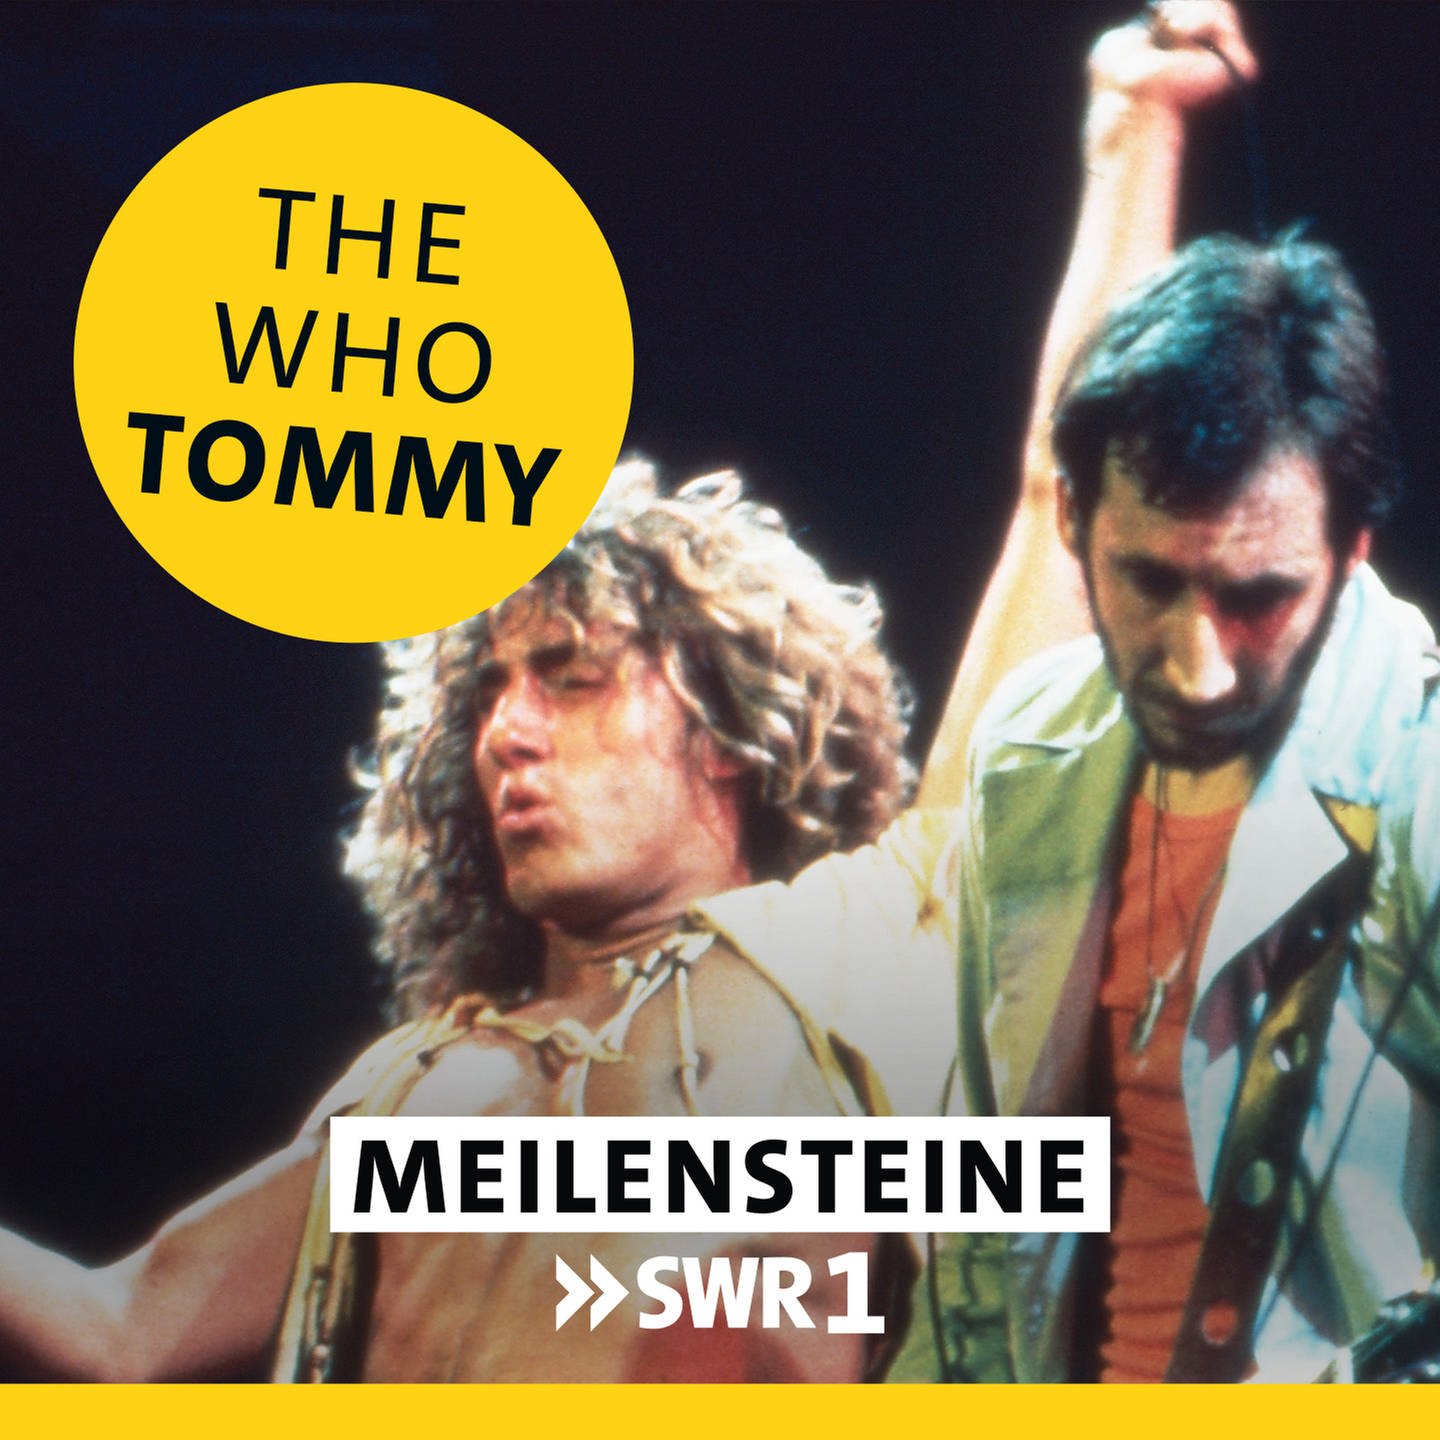 The Who – "Tommy"